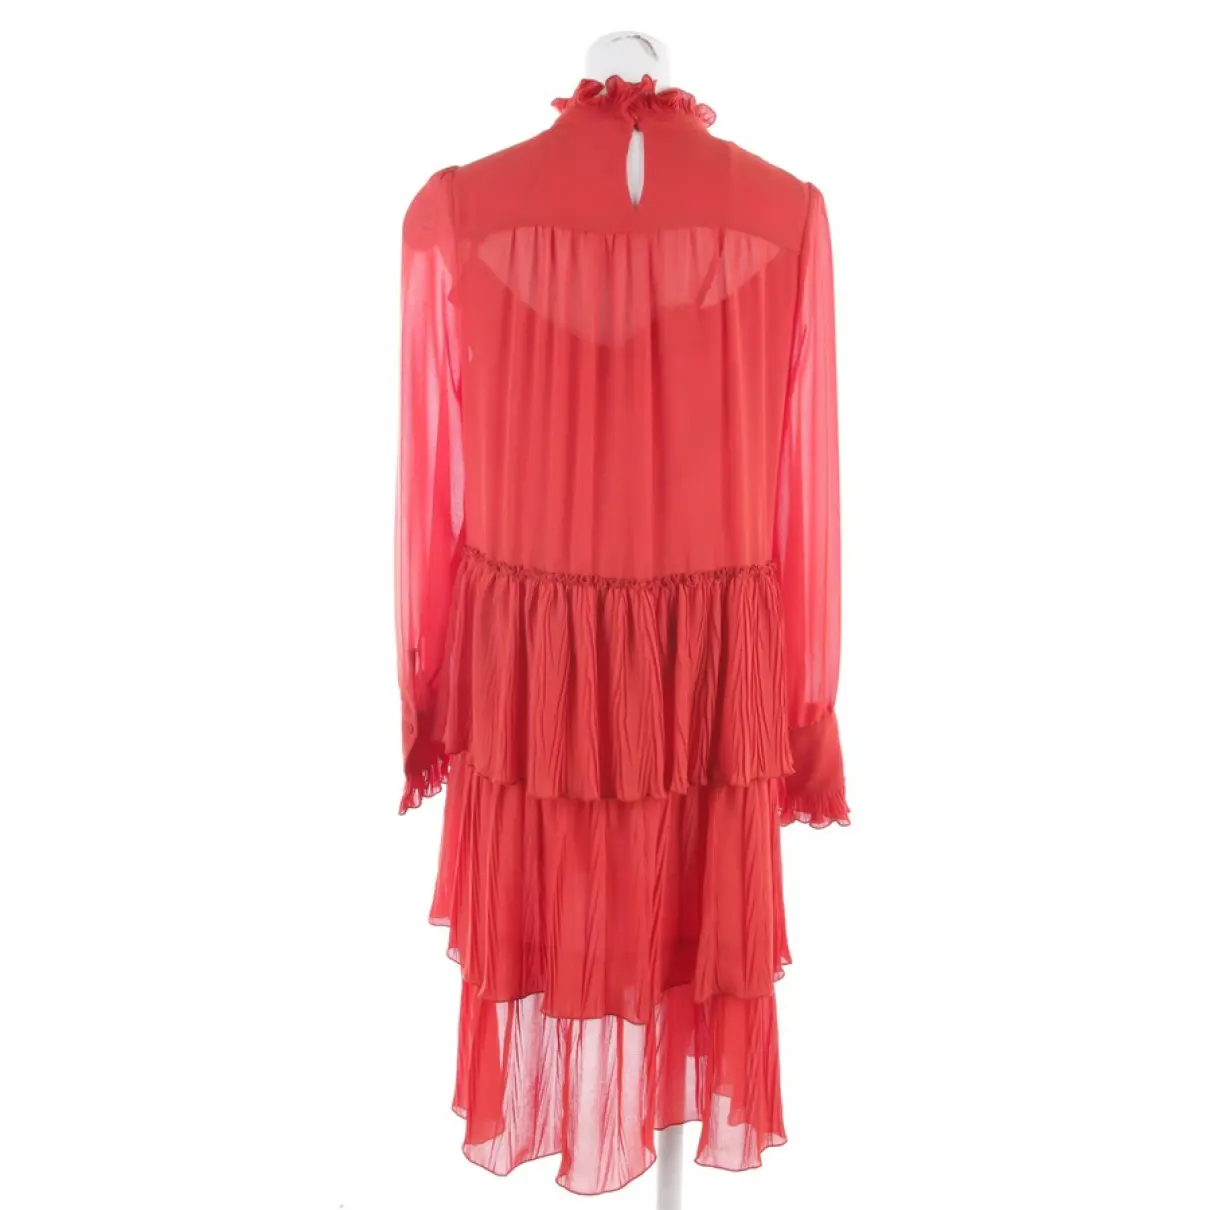 Buy See by Chloé Dress online